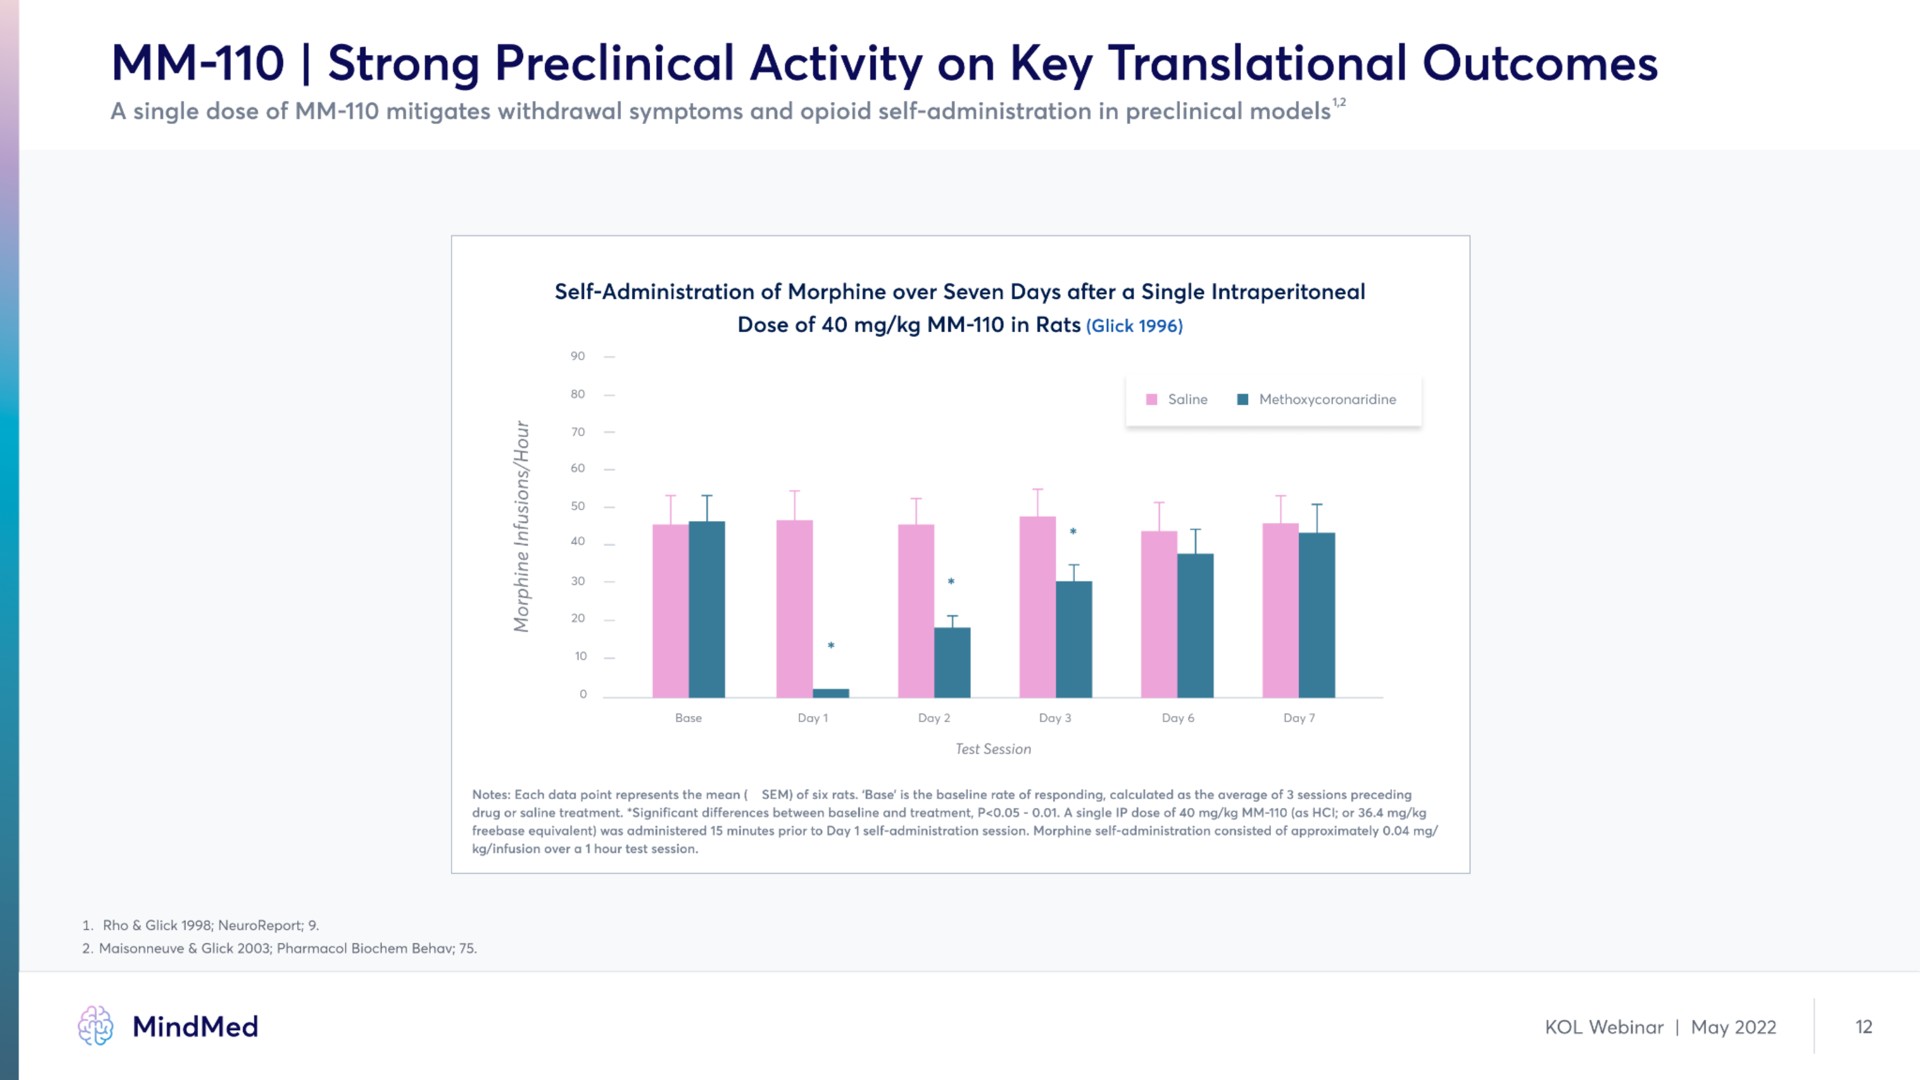 strong preclinical activity on key translational outcomes | MindMed